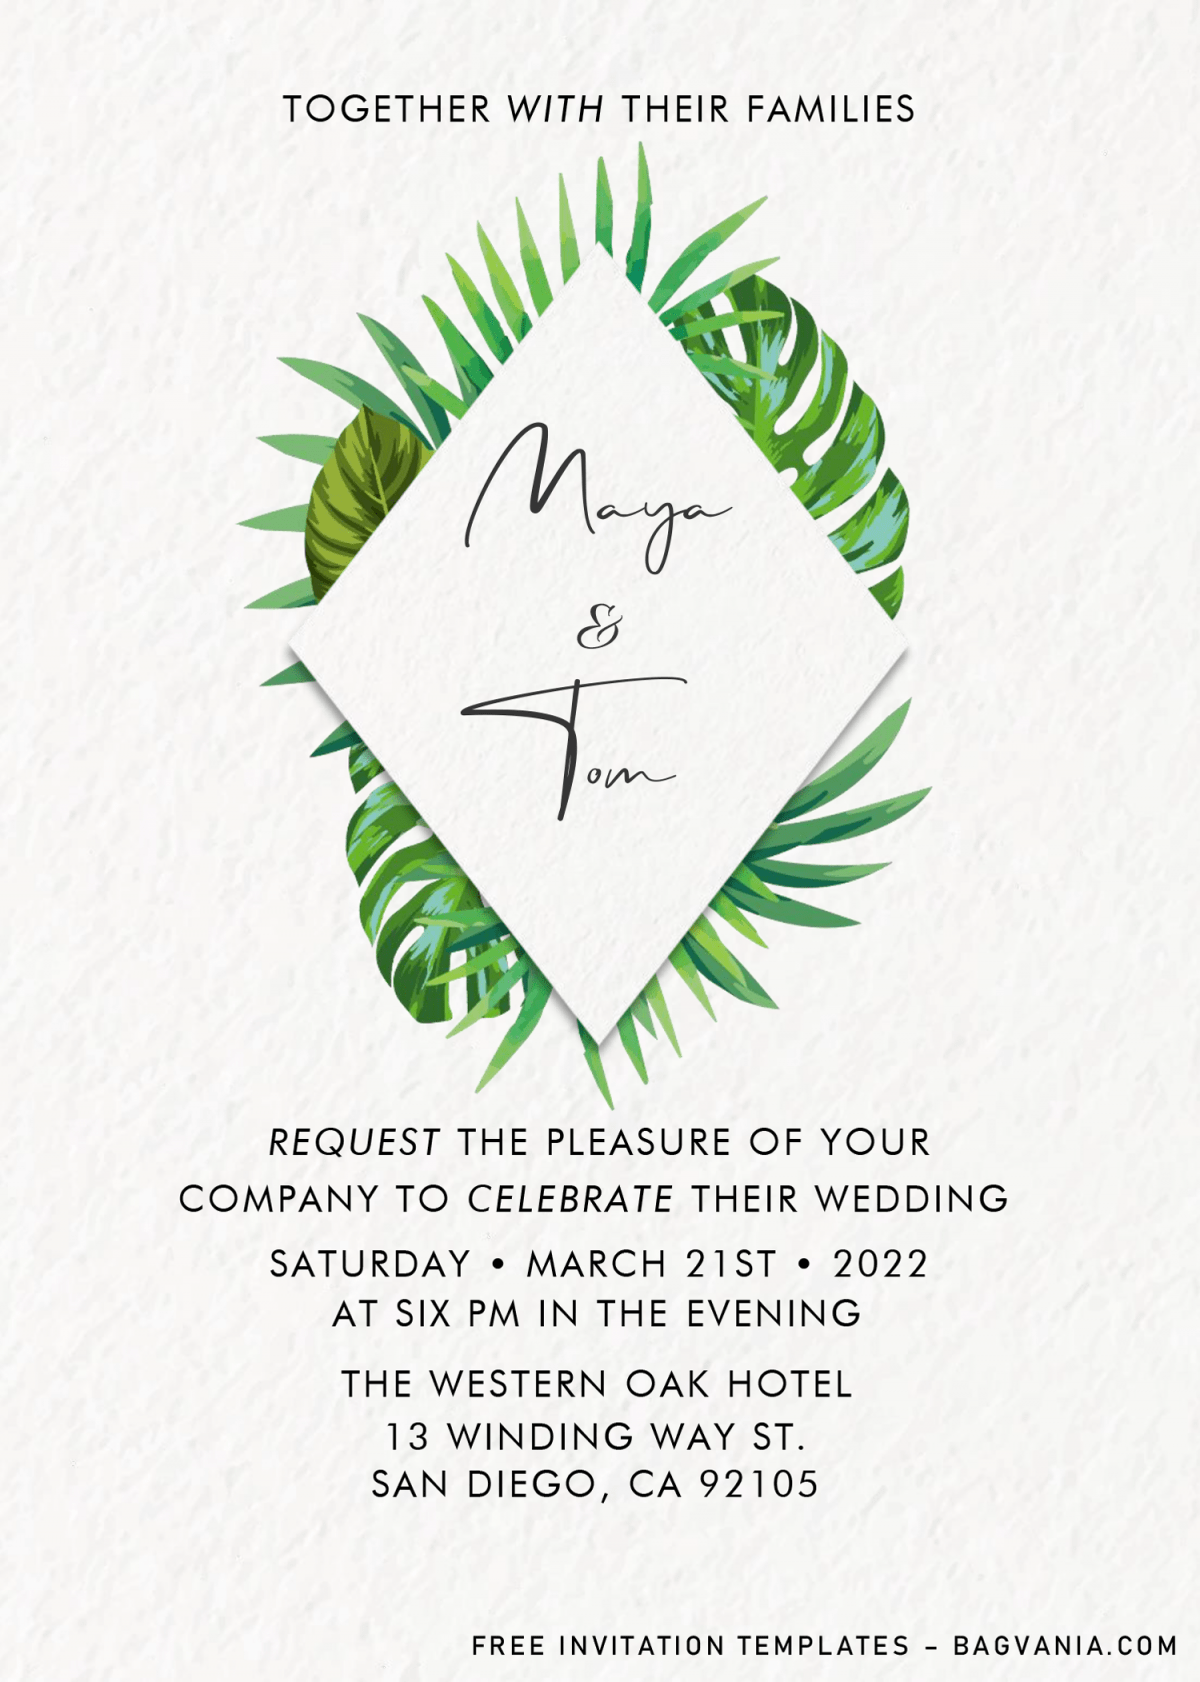 Classy Tropical Invitation Templates - Editable .Docx and has aesthetic fonts